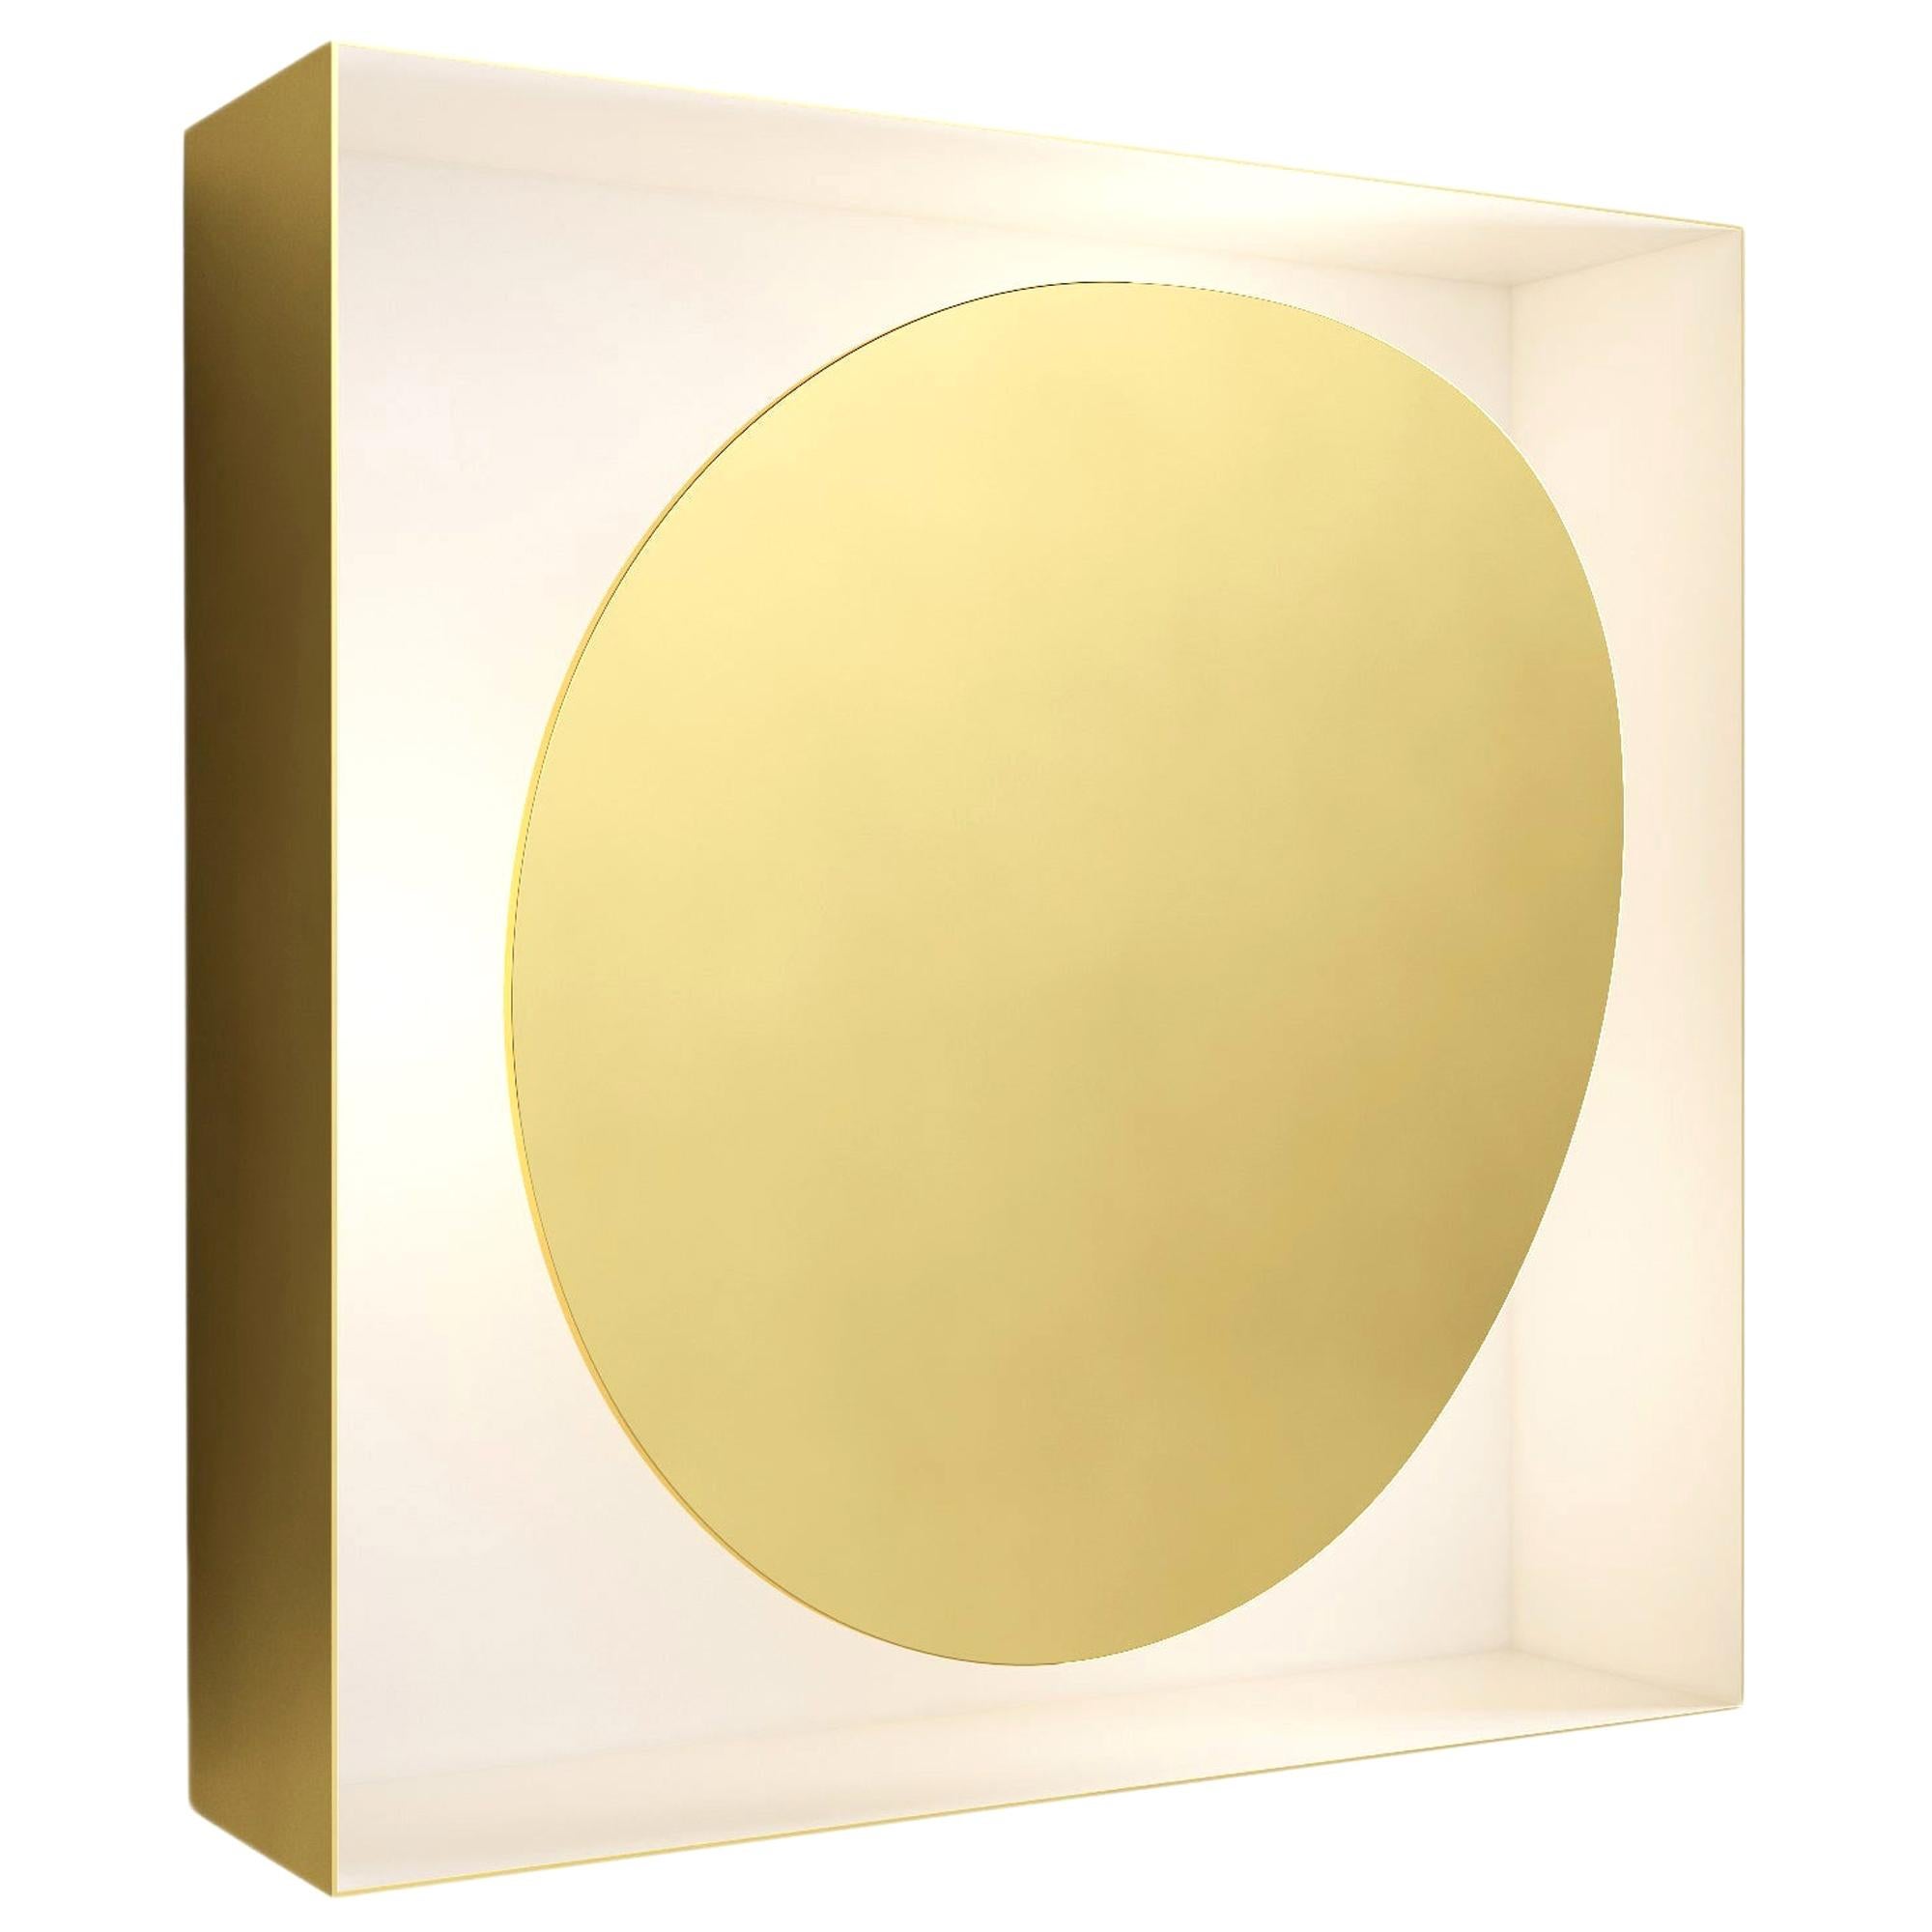 Wall Sconce FC02 by Florencia Costa Polished Brass Italy 2020 Limited Edition